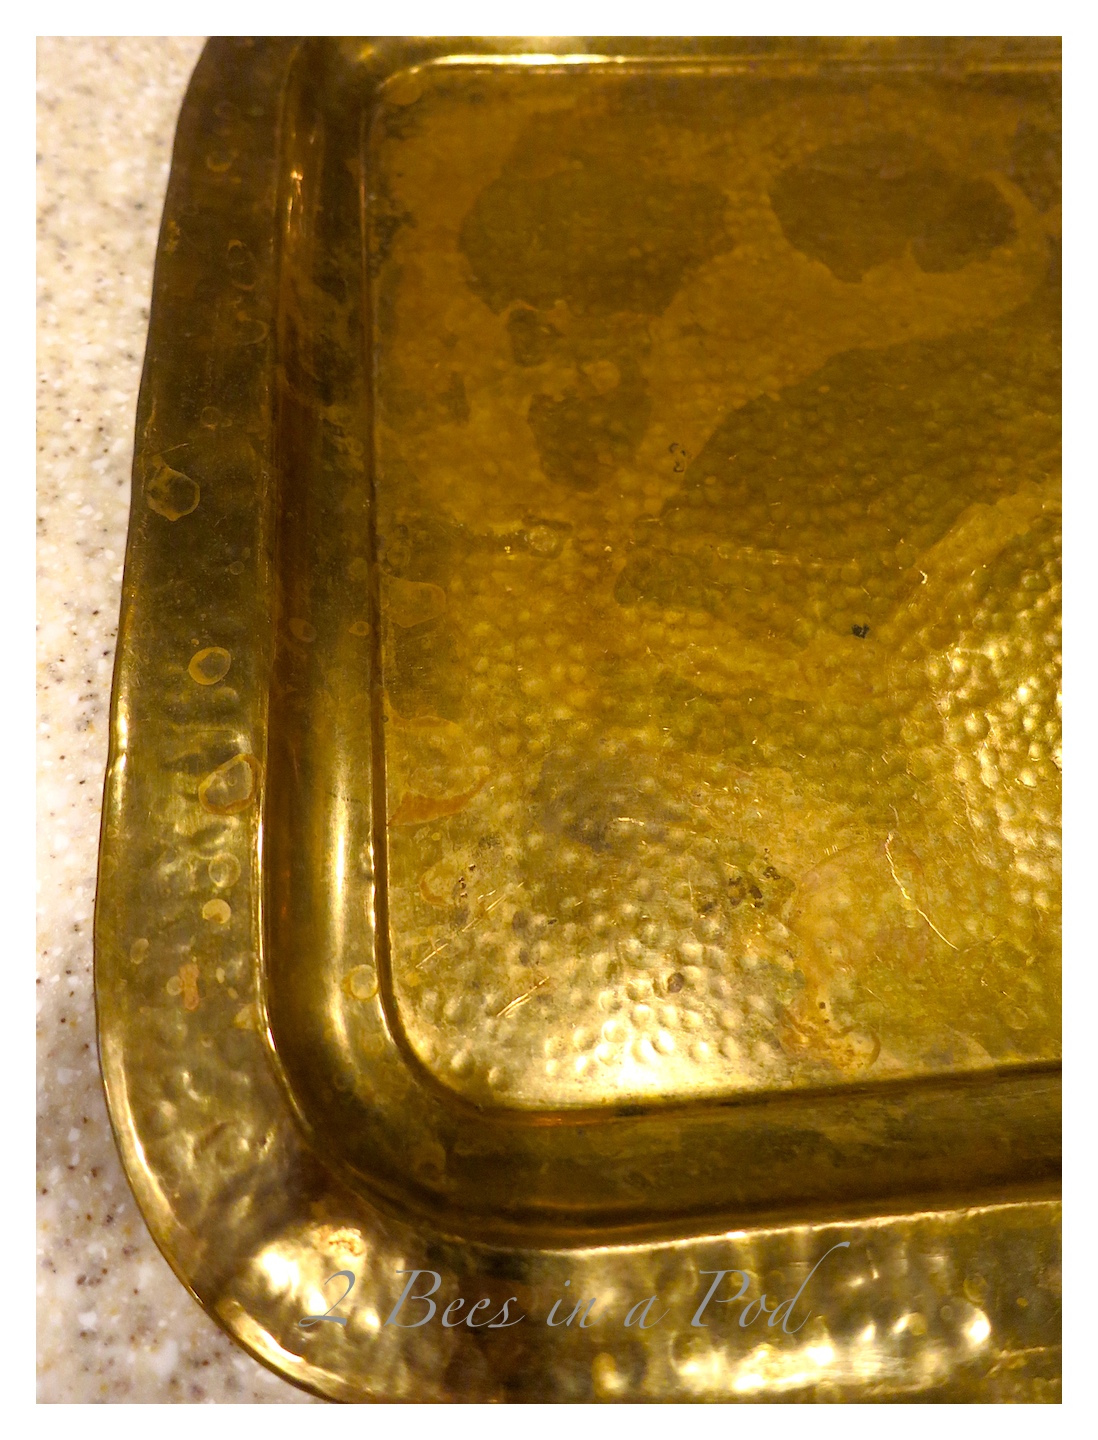 This pretty Hammered brass tray was a 10 cent thrift store find.  It was brought back to life with just a little brass cleaner.